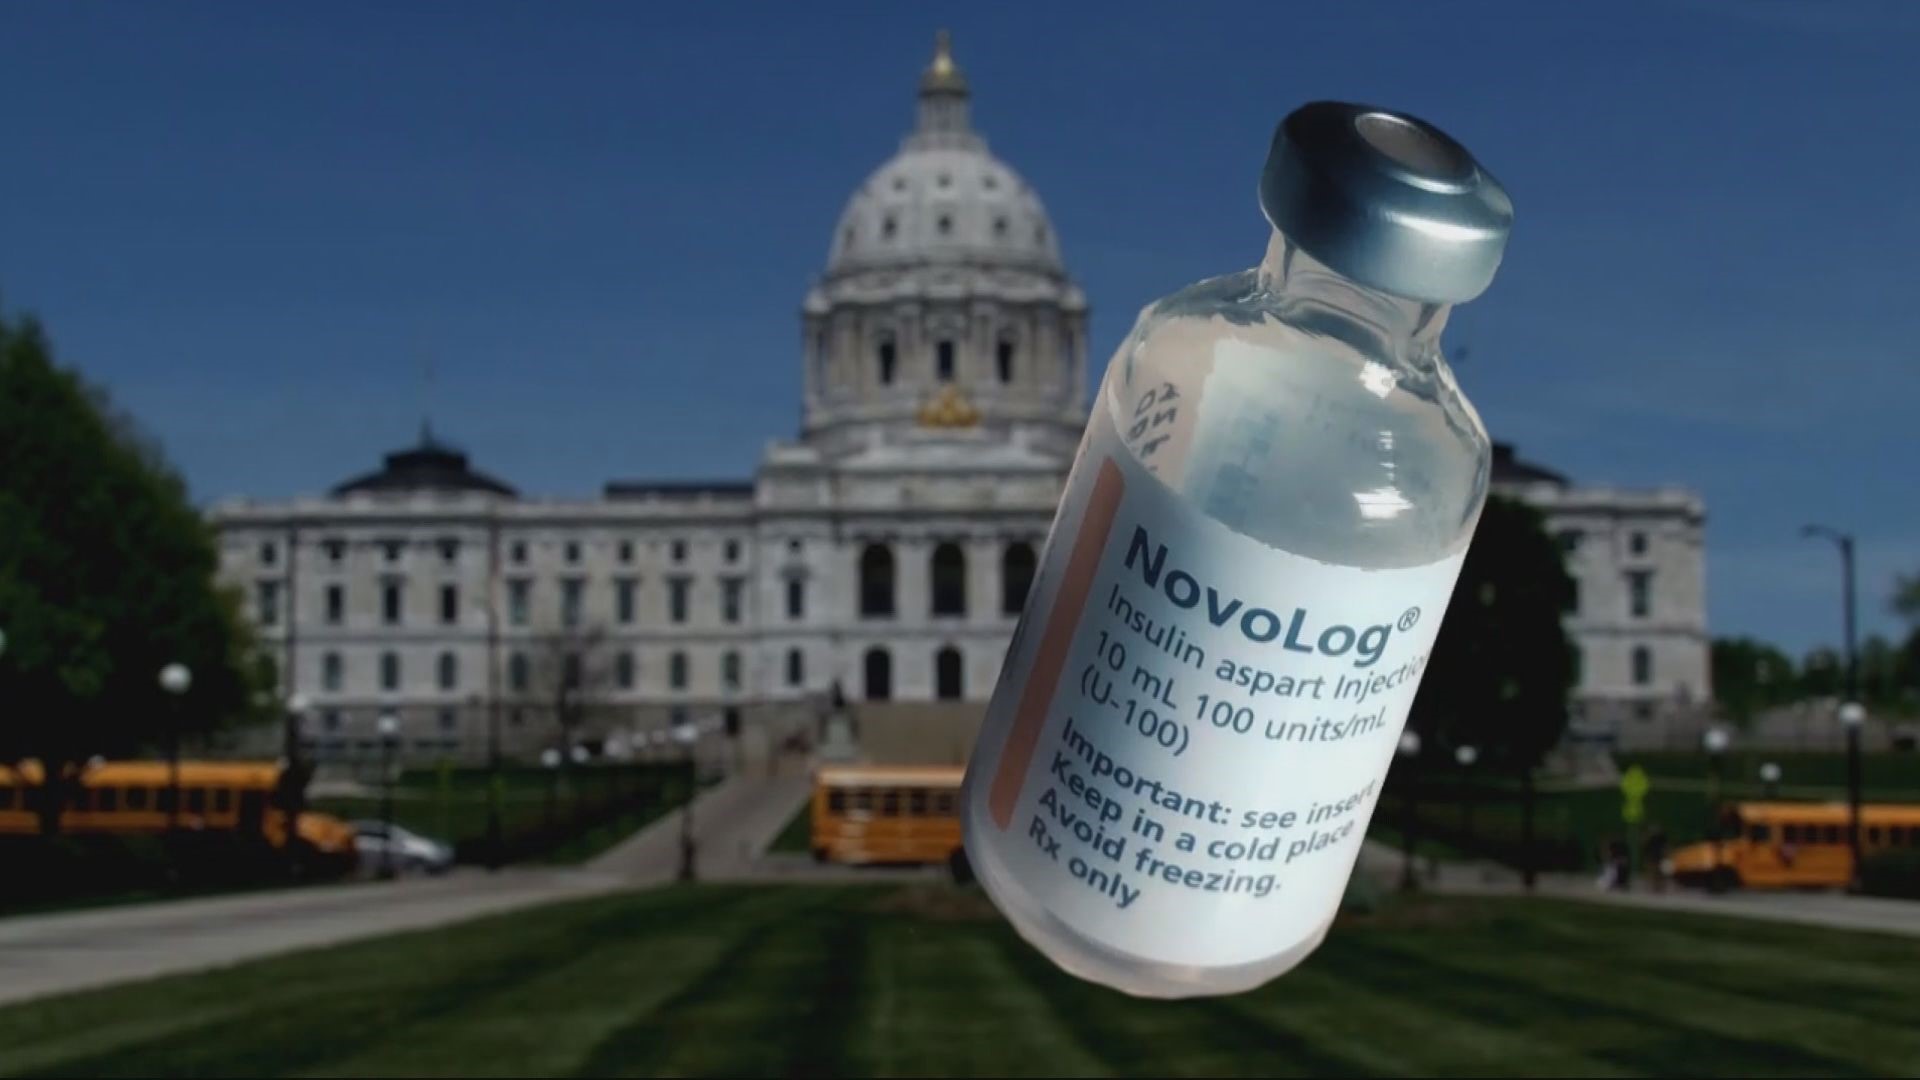 Senate Republicans unveiled their version of an insulin supply plan Thursday, which would have doctors dispense medication donated by drug makers.